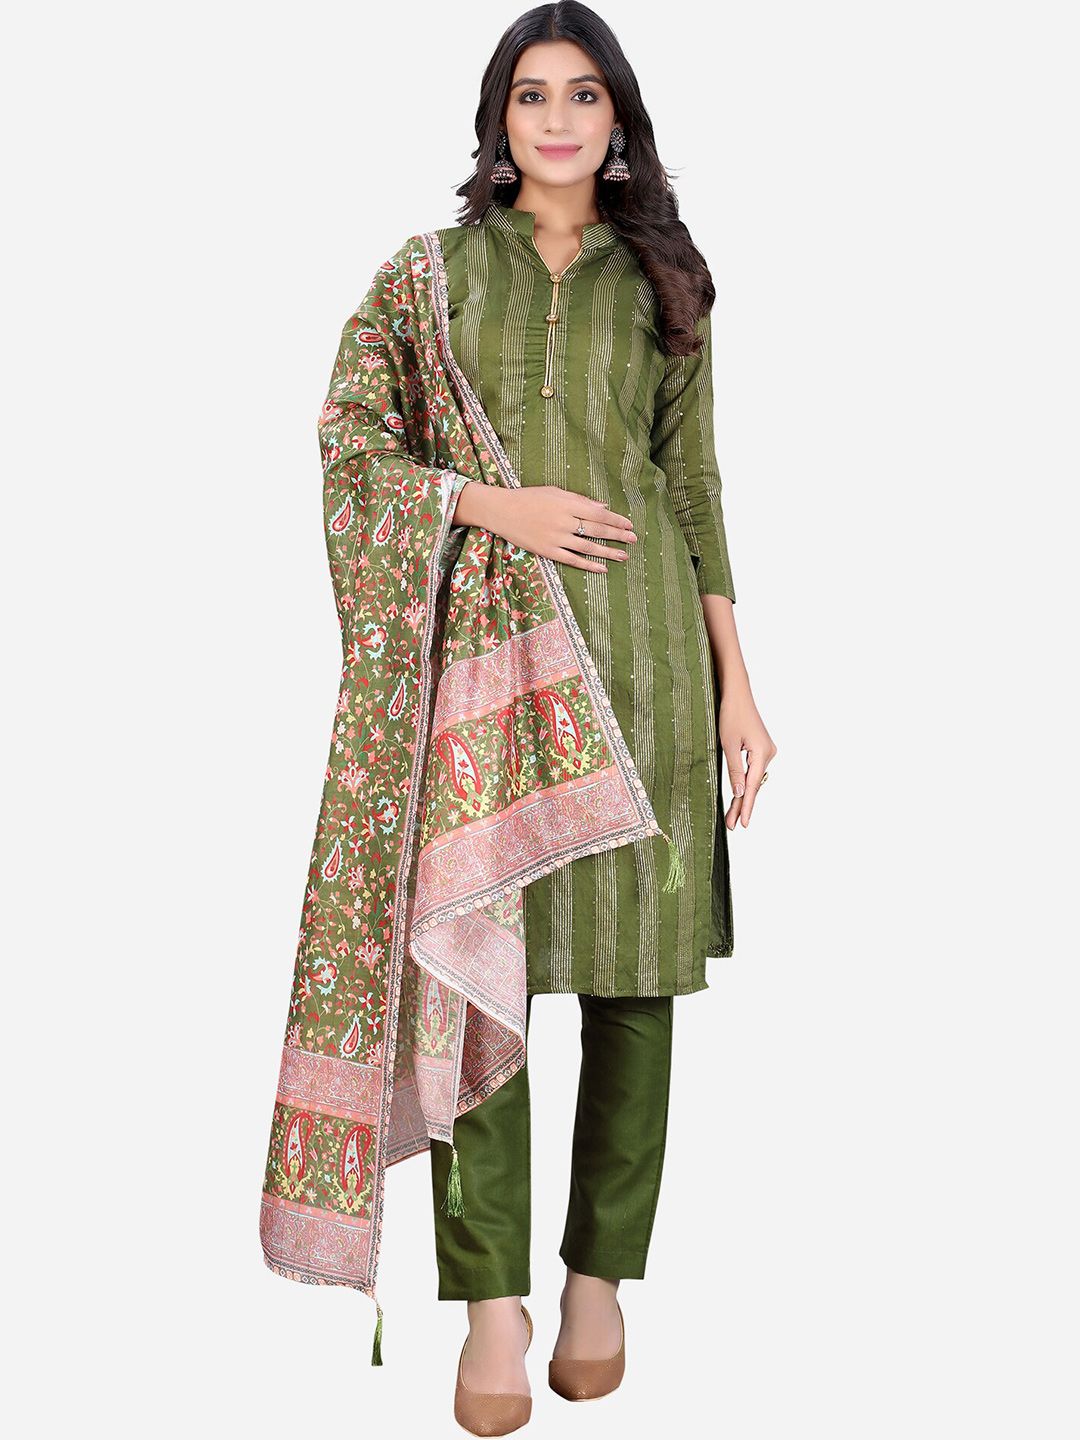 Satrani Olive Green & Pink Unstitched Dress Material with Dupatta Price in India